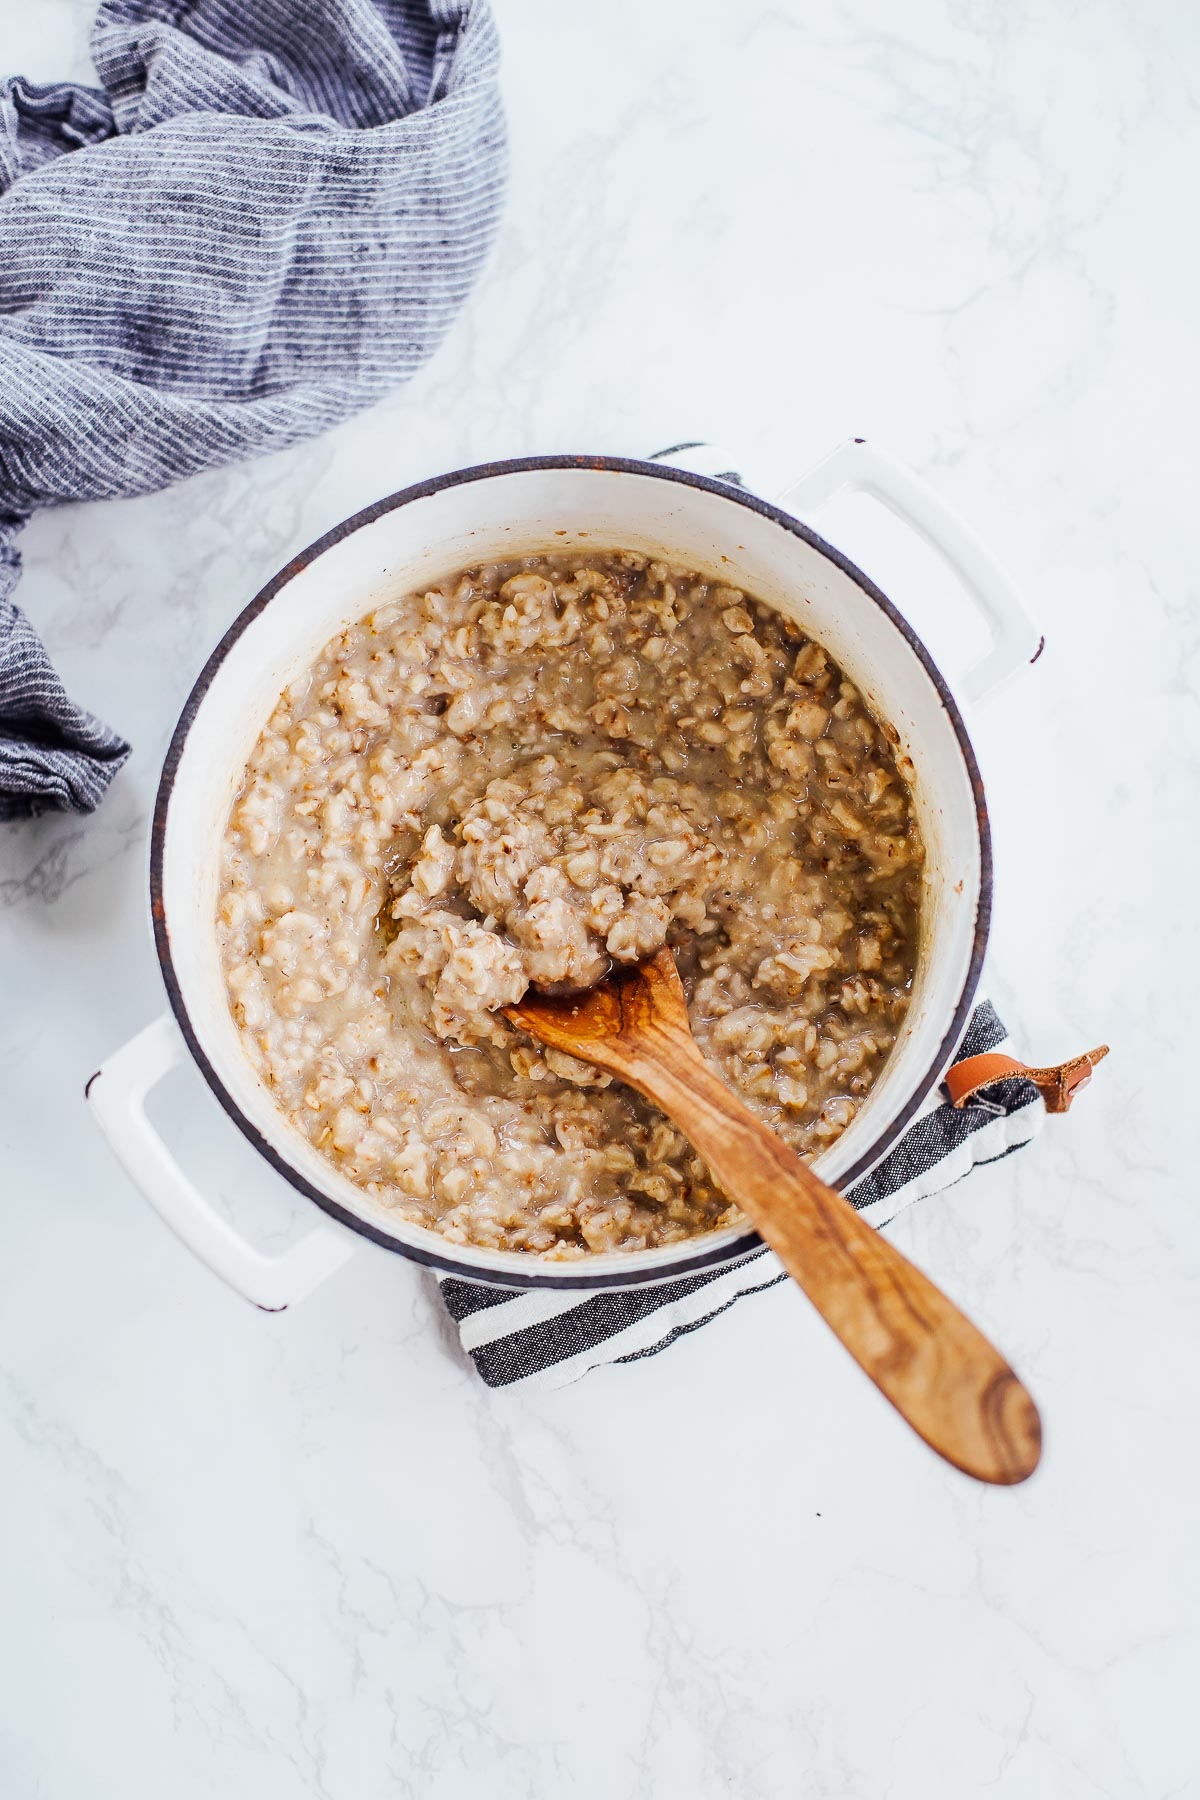 A pot of oats with a spoon dipping in.